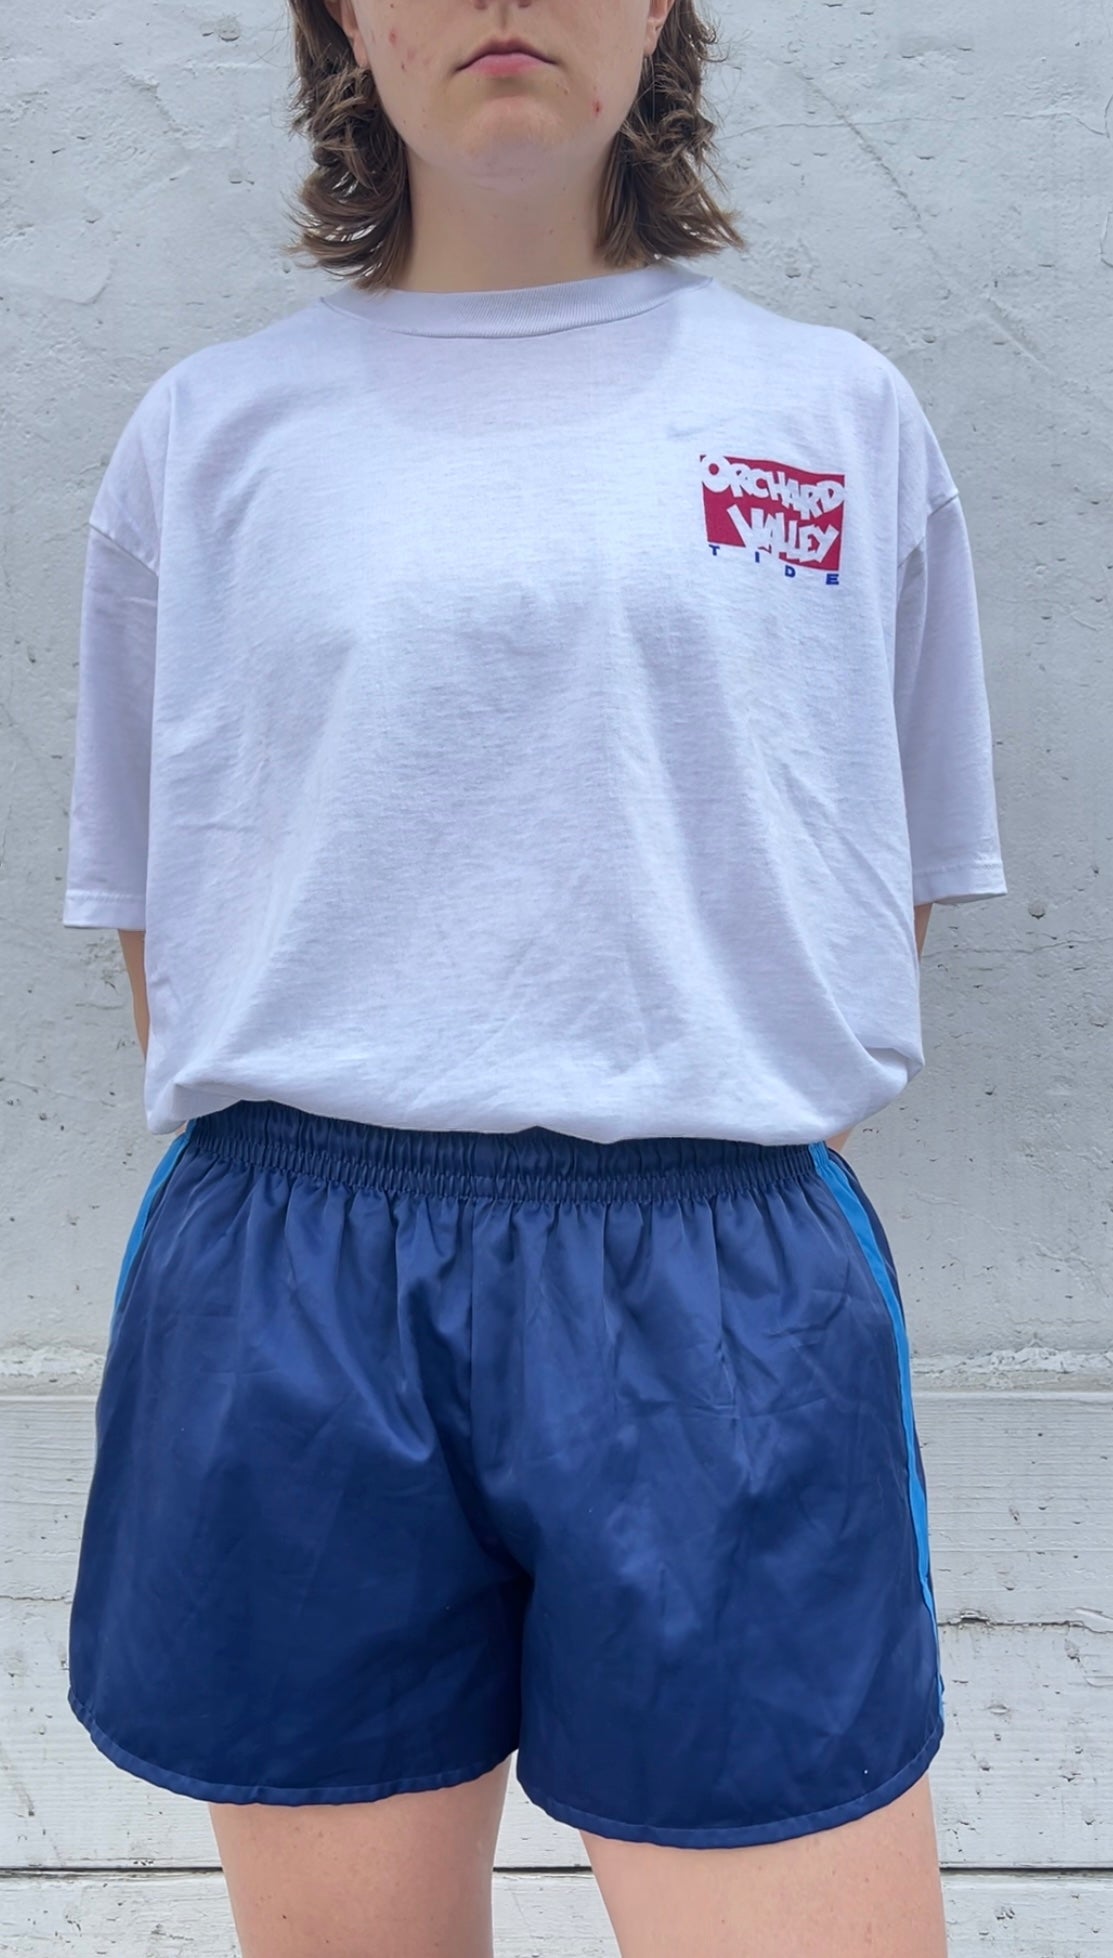 90s Jerzees Heavyweight "Orchard Valley Tide" tee